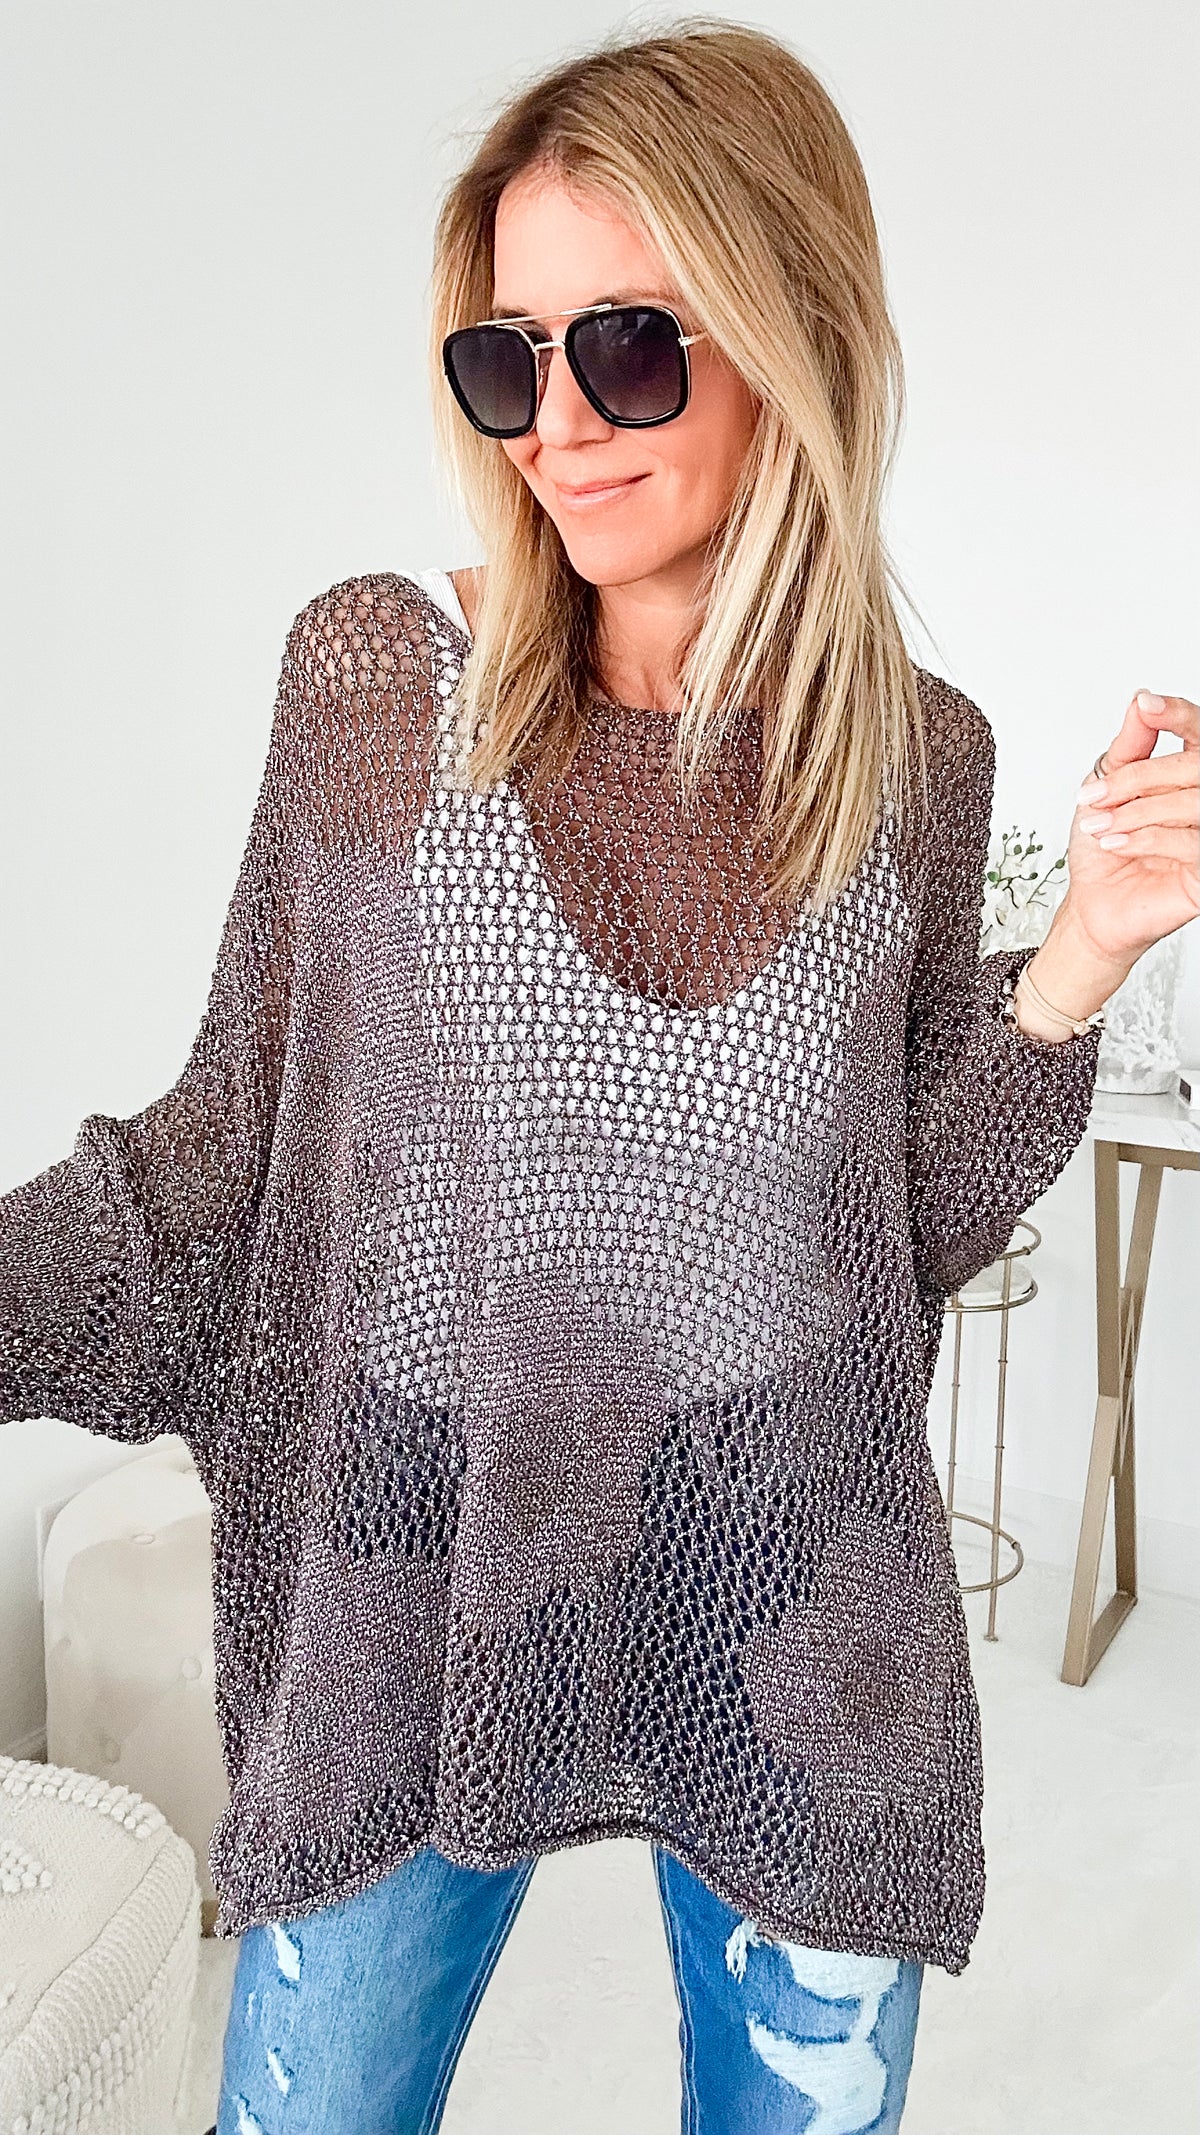 Windflower Italian Metallic Crochet Pullover - Metallic Dark Brown-140 Sweaters-Yolly-Coastal Bloom Boutique, find the trendiest versions of the popular styles and looks Located in Indialantic, FL